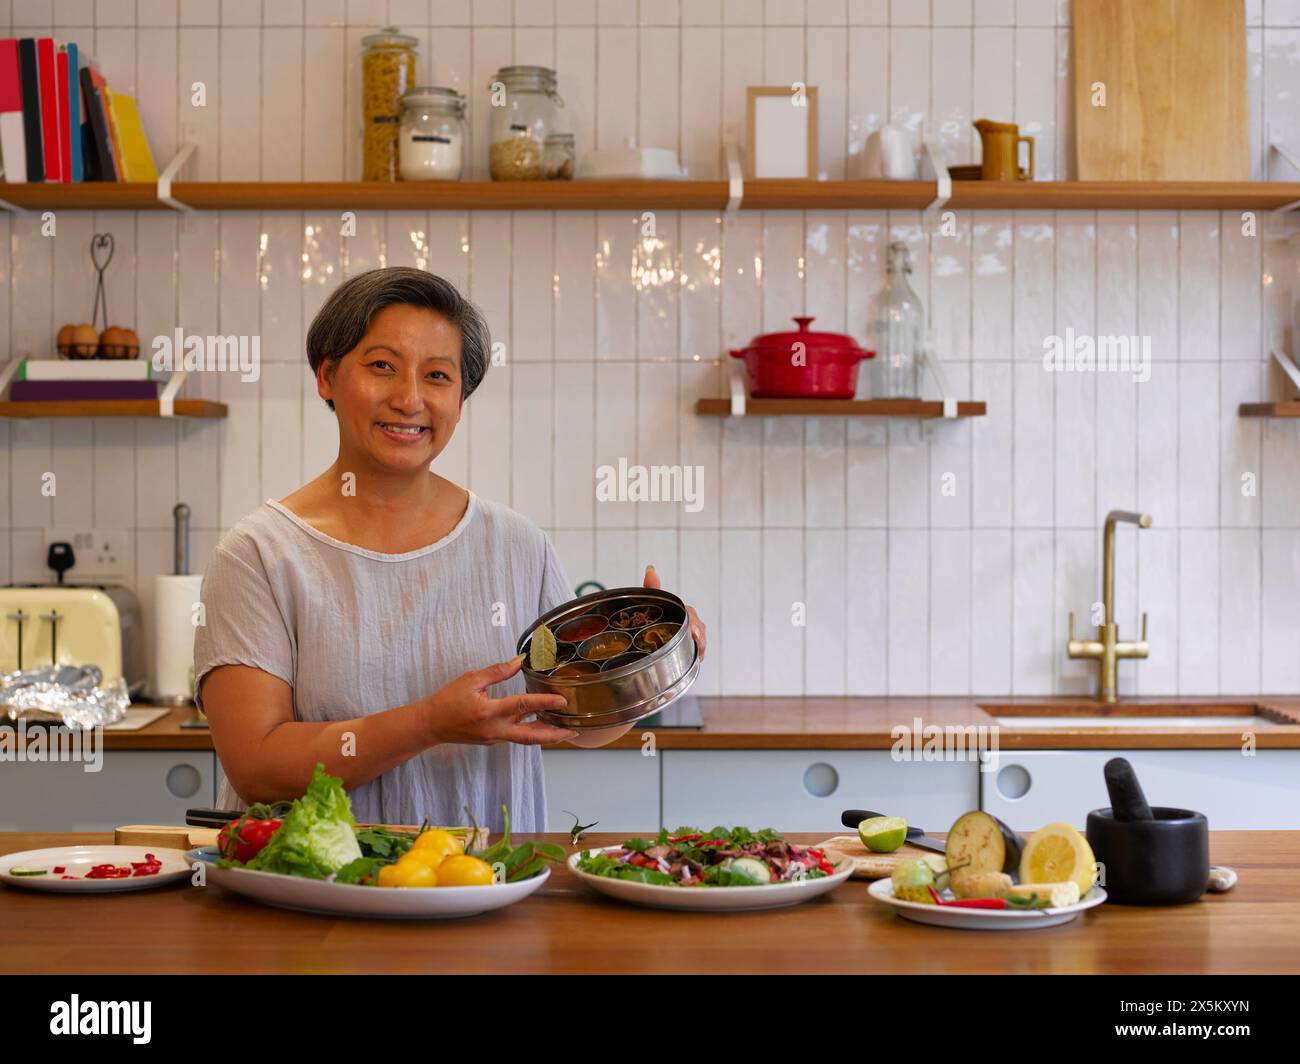 Portrait of woman showing freshly prepared food in kitchen Stock Photo